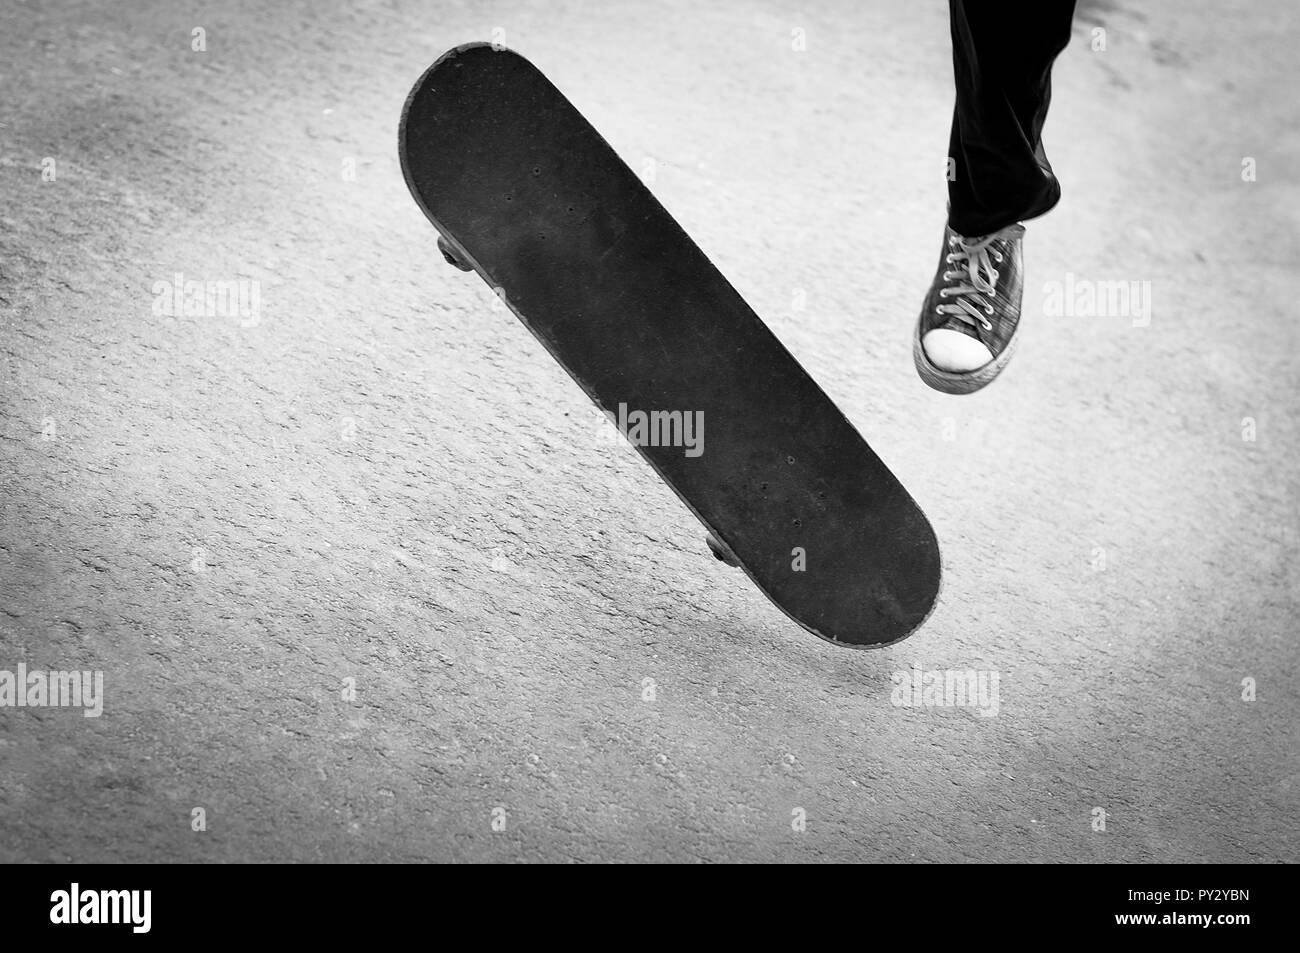 The moment of performing a skateboarding trick. Stock Photo